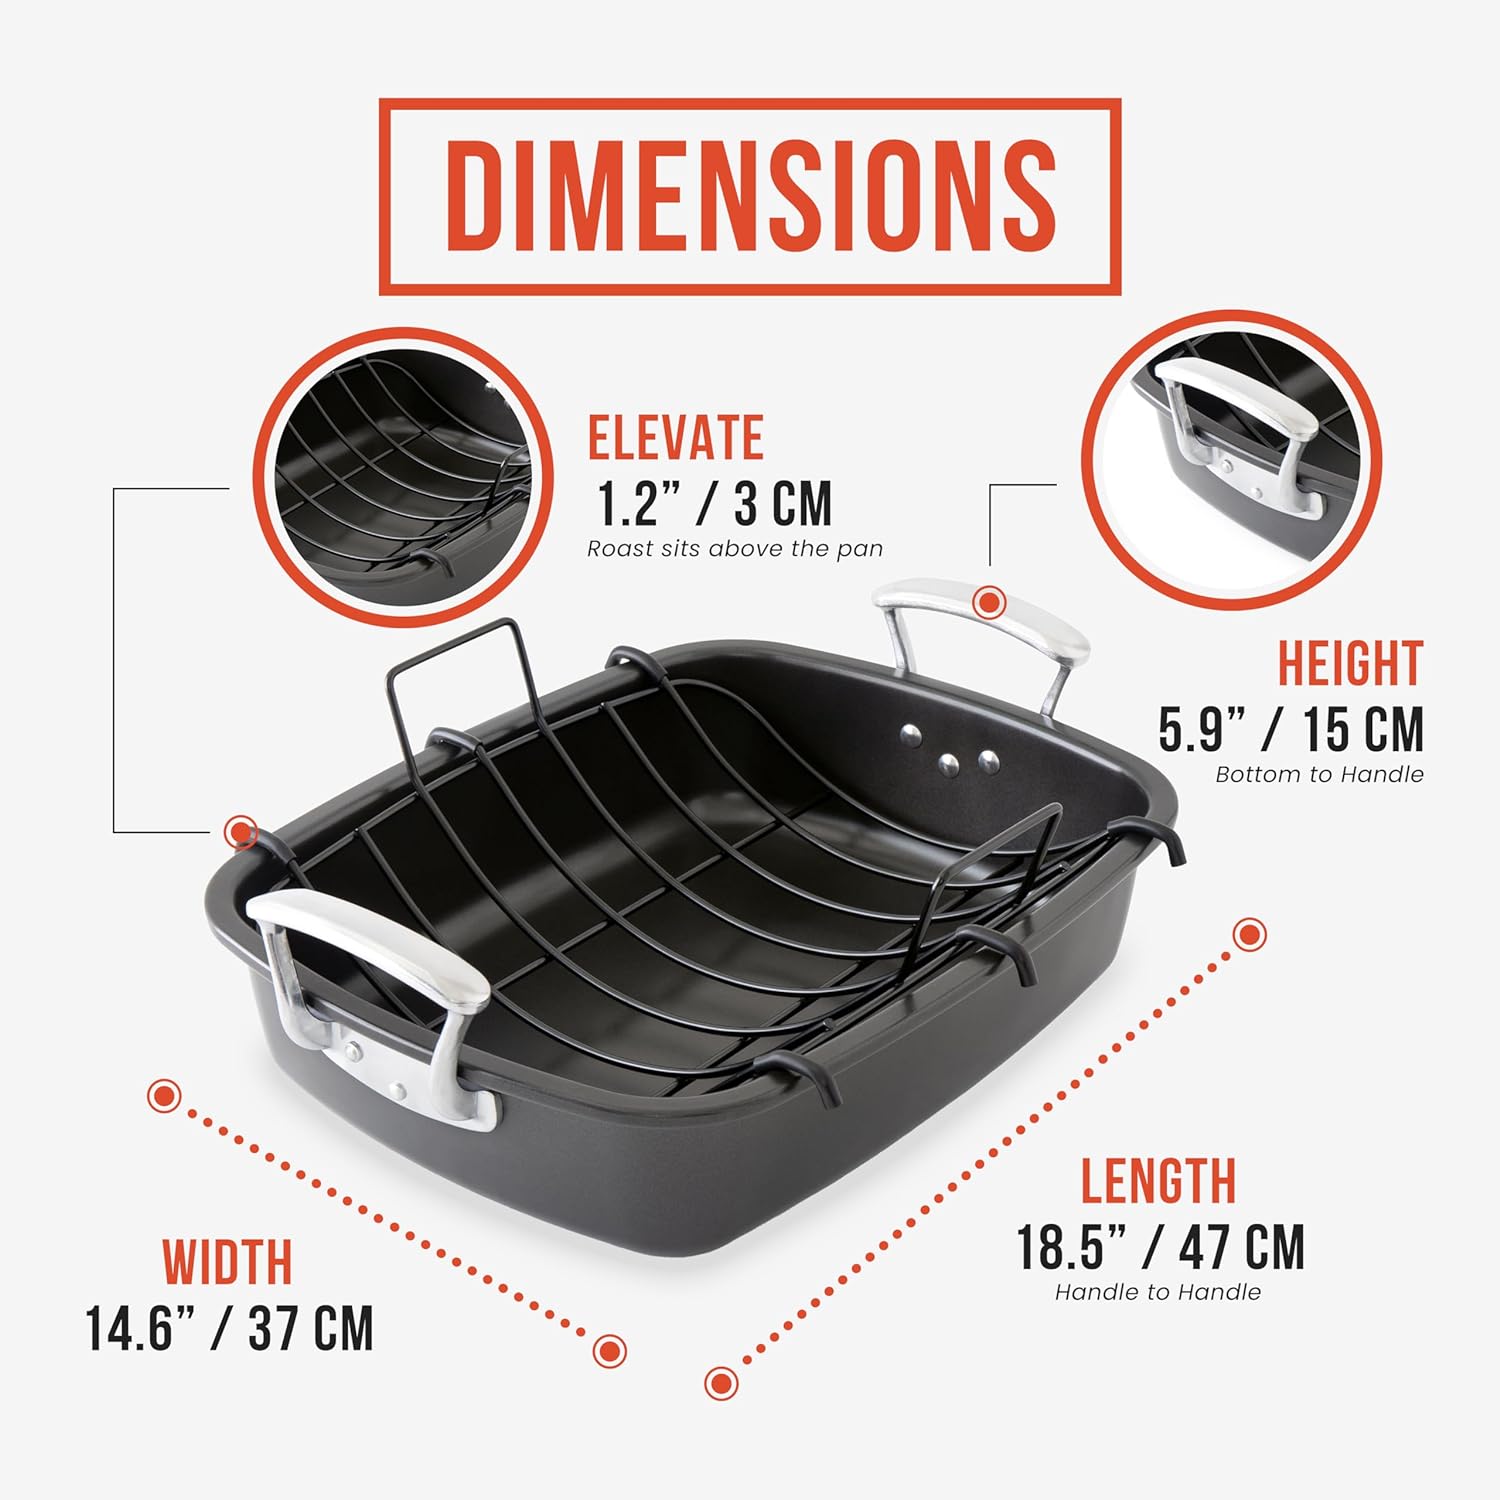 Chef Pomodoro Nonstick Carbon Steel Small Roasting Pan Roaster with Flat  Rack, 11 x 7.7